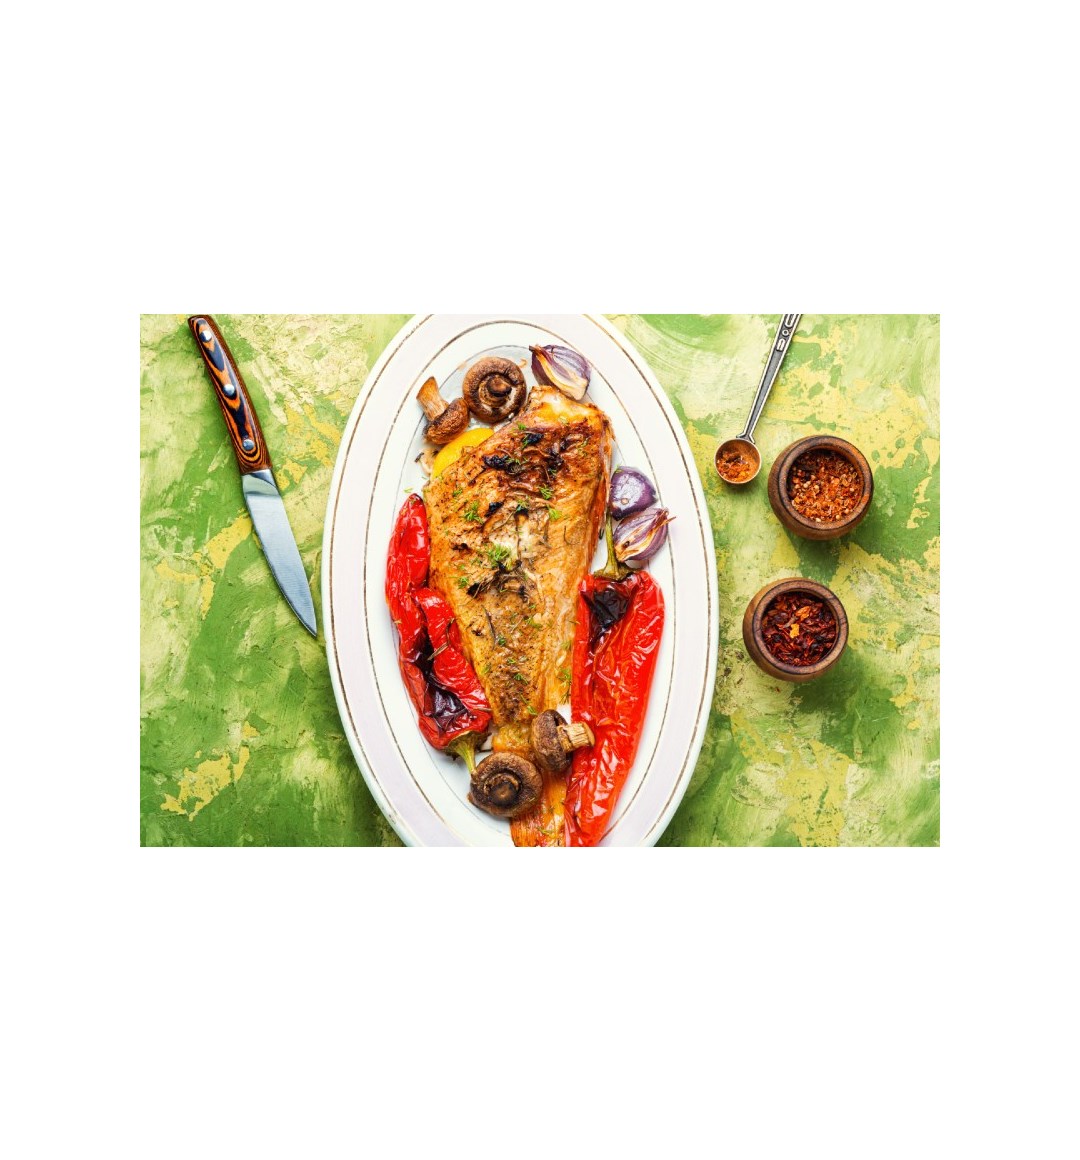 roasted-red-perch-and-vegetables-RJK8ZUJ